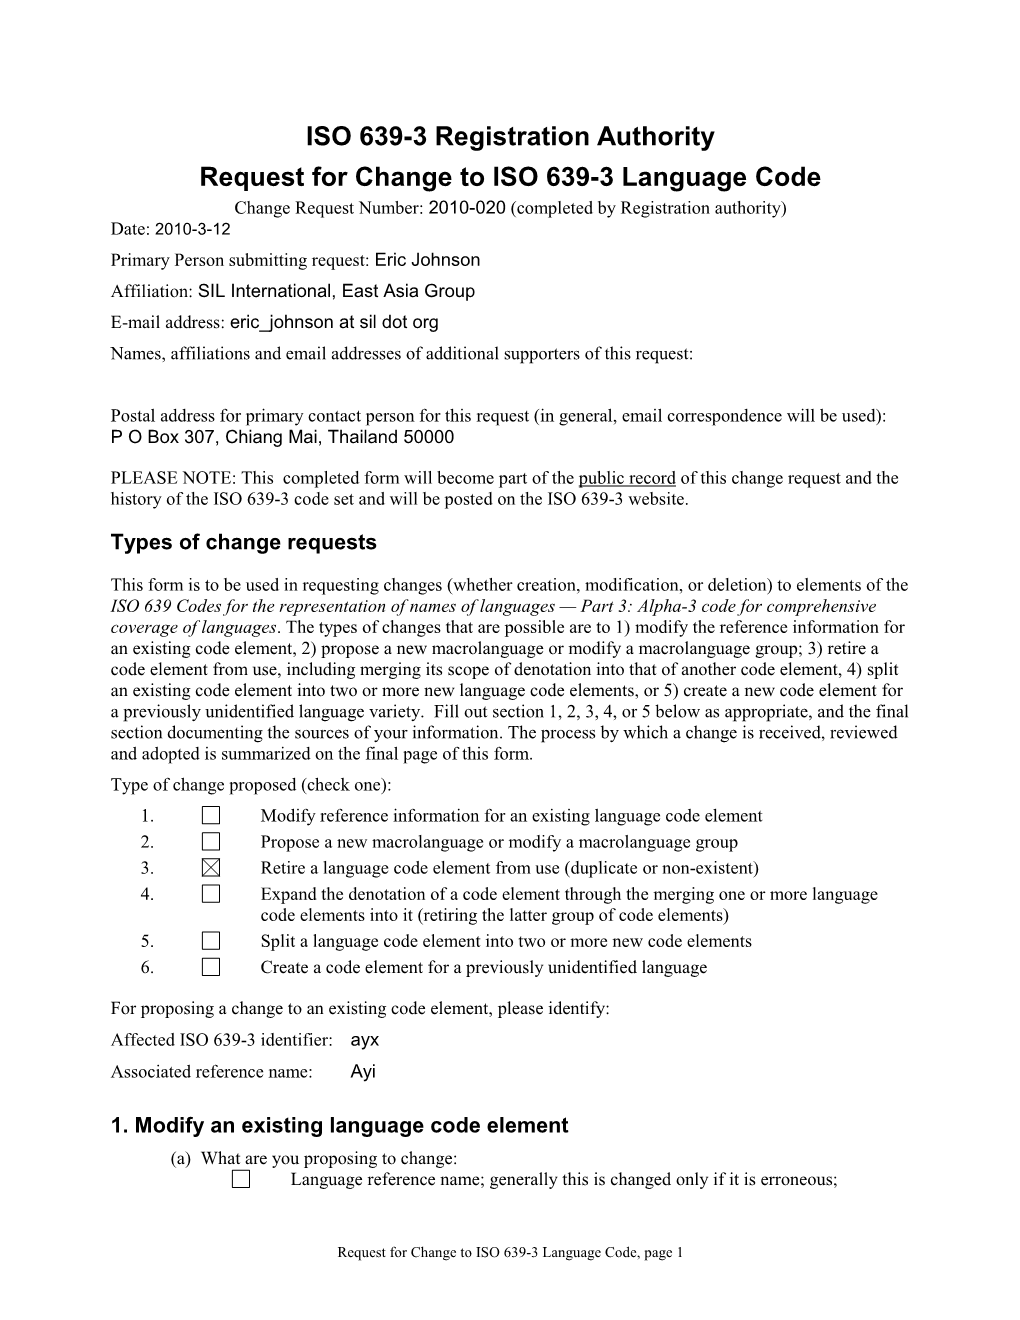 ISO 639-3 Change Request 2010-020